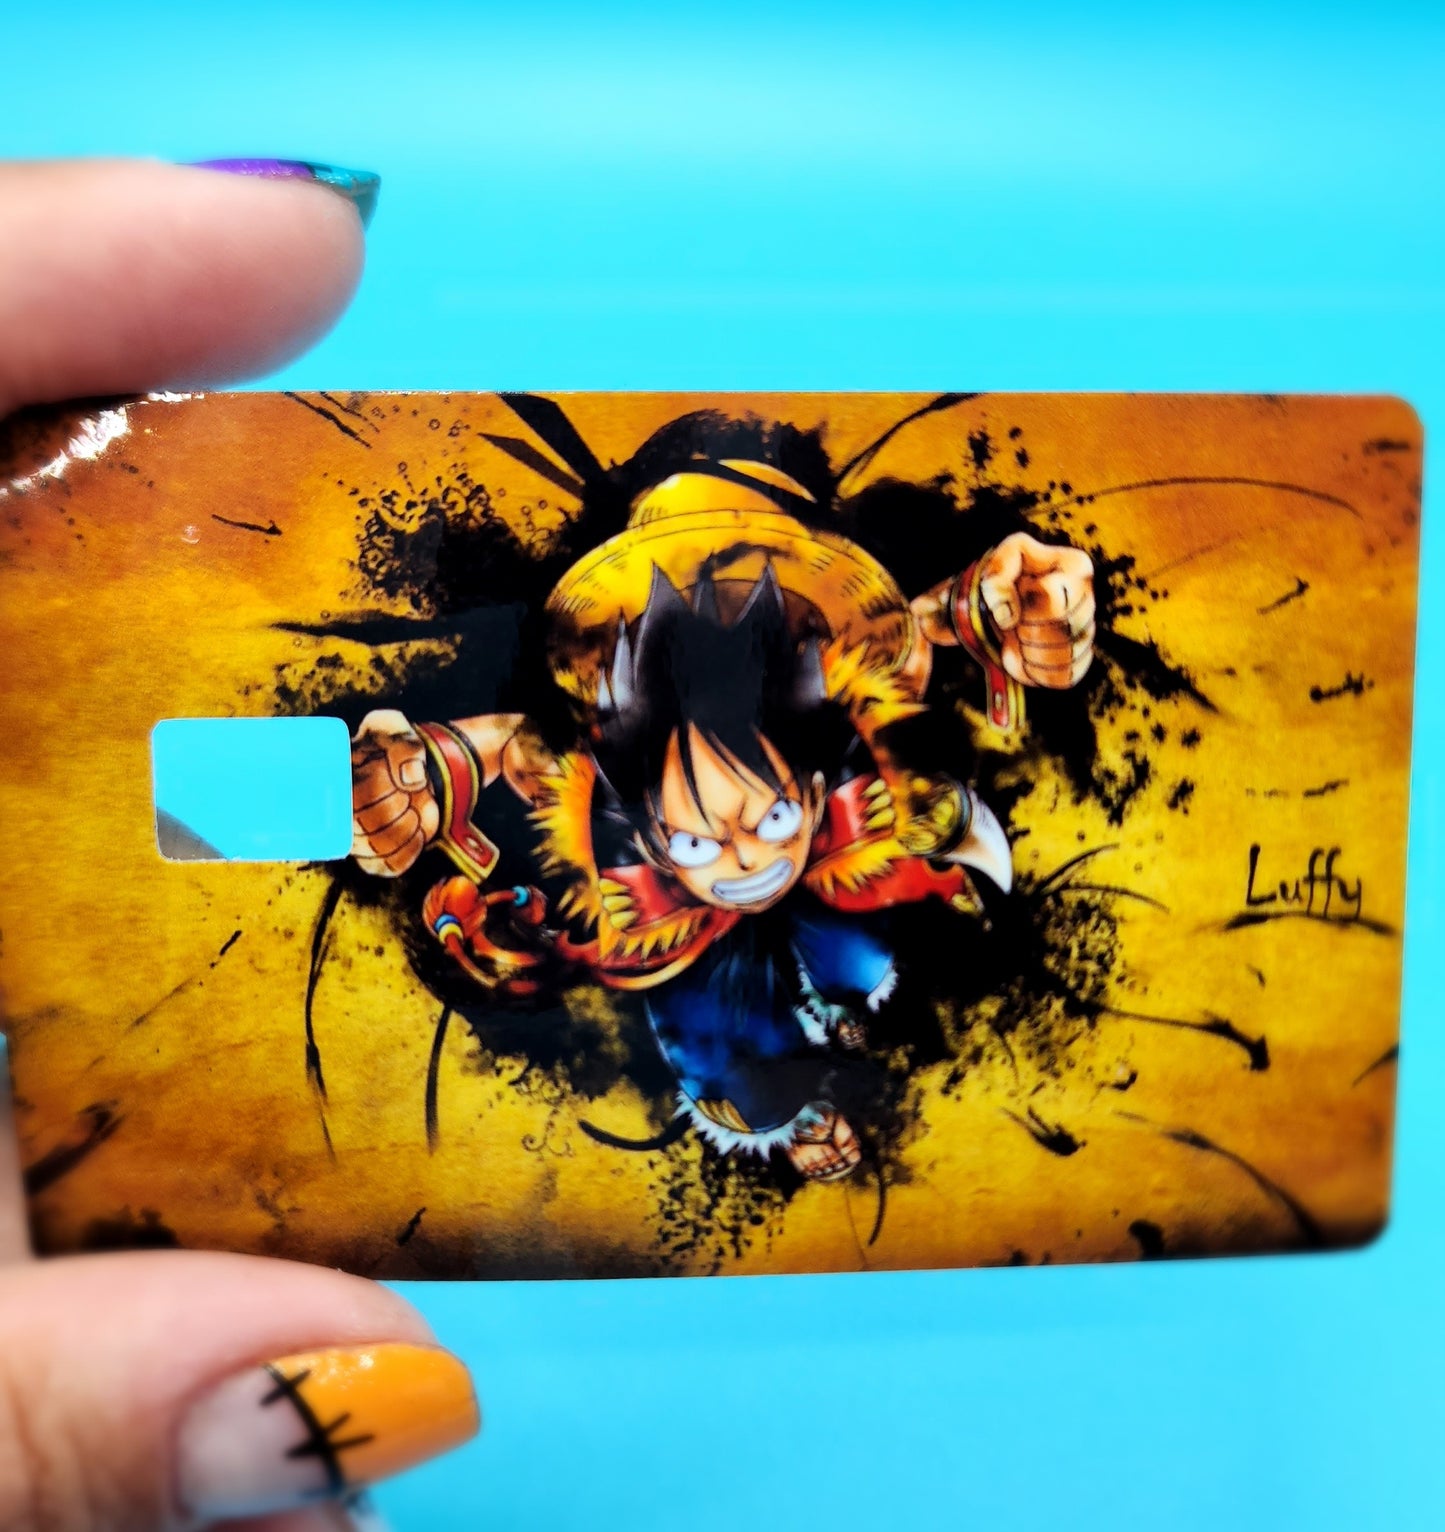 Anime (One piece) inspired Credit card skins/covers